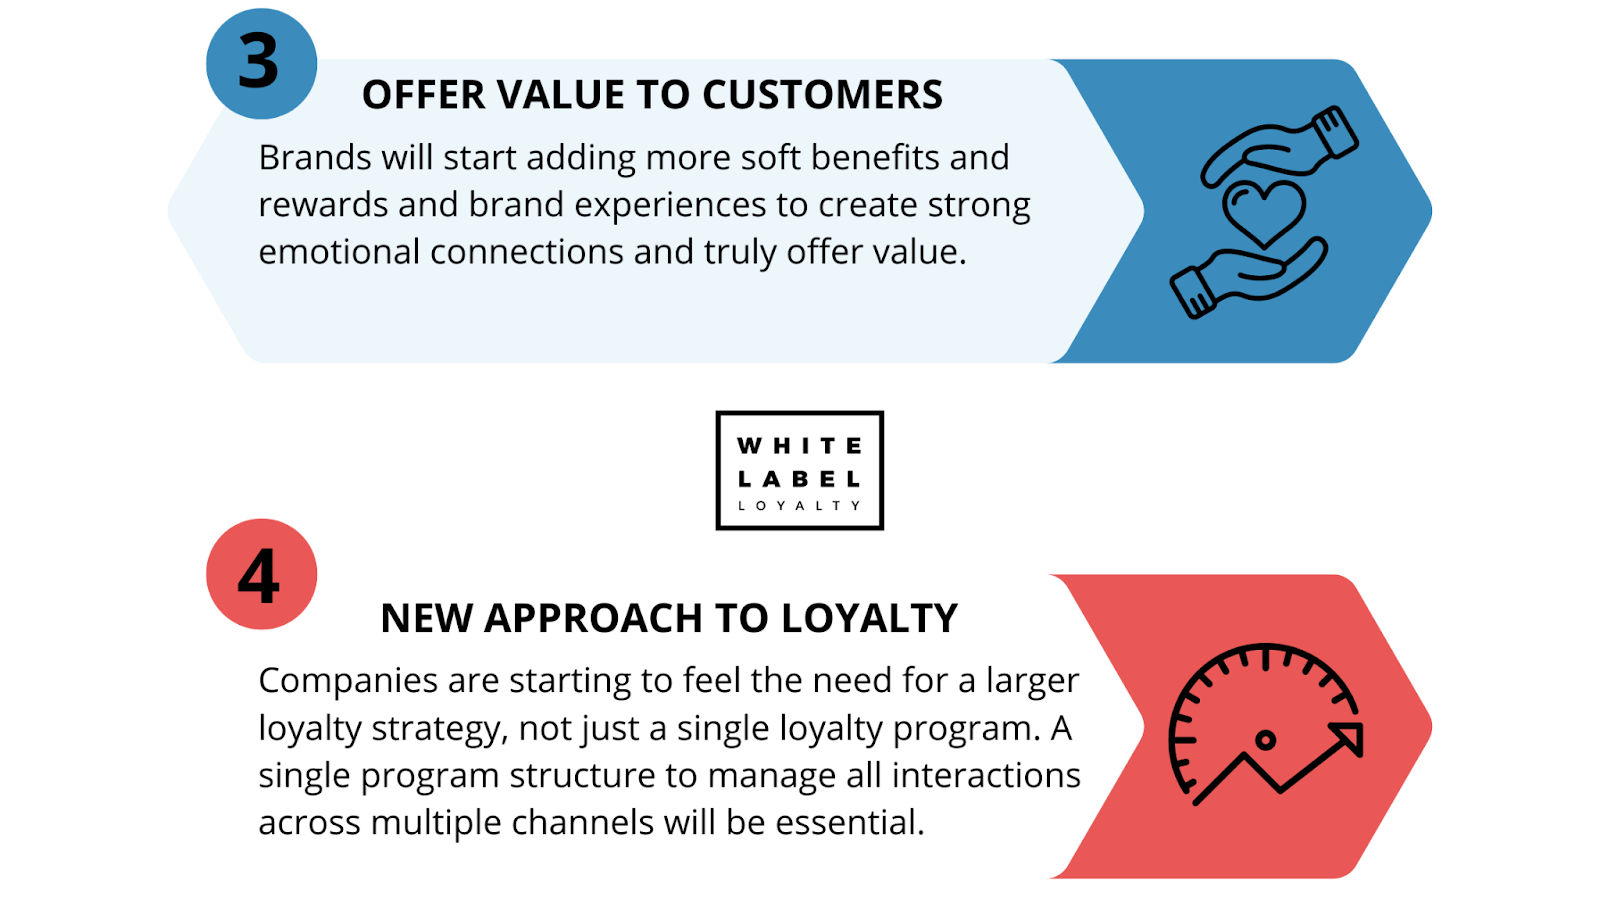 Customer loyalty trends for 2024: offering value to customers and a new approach to loyalty.